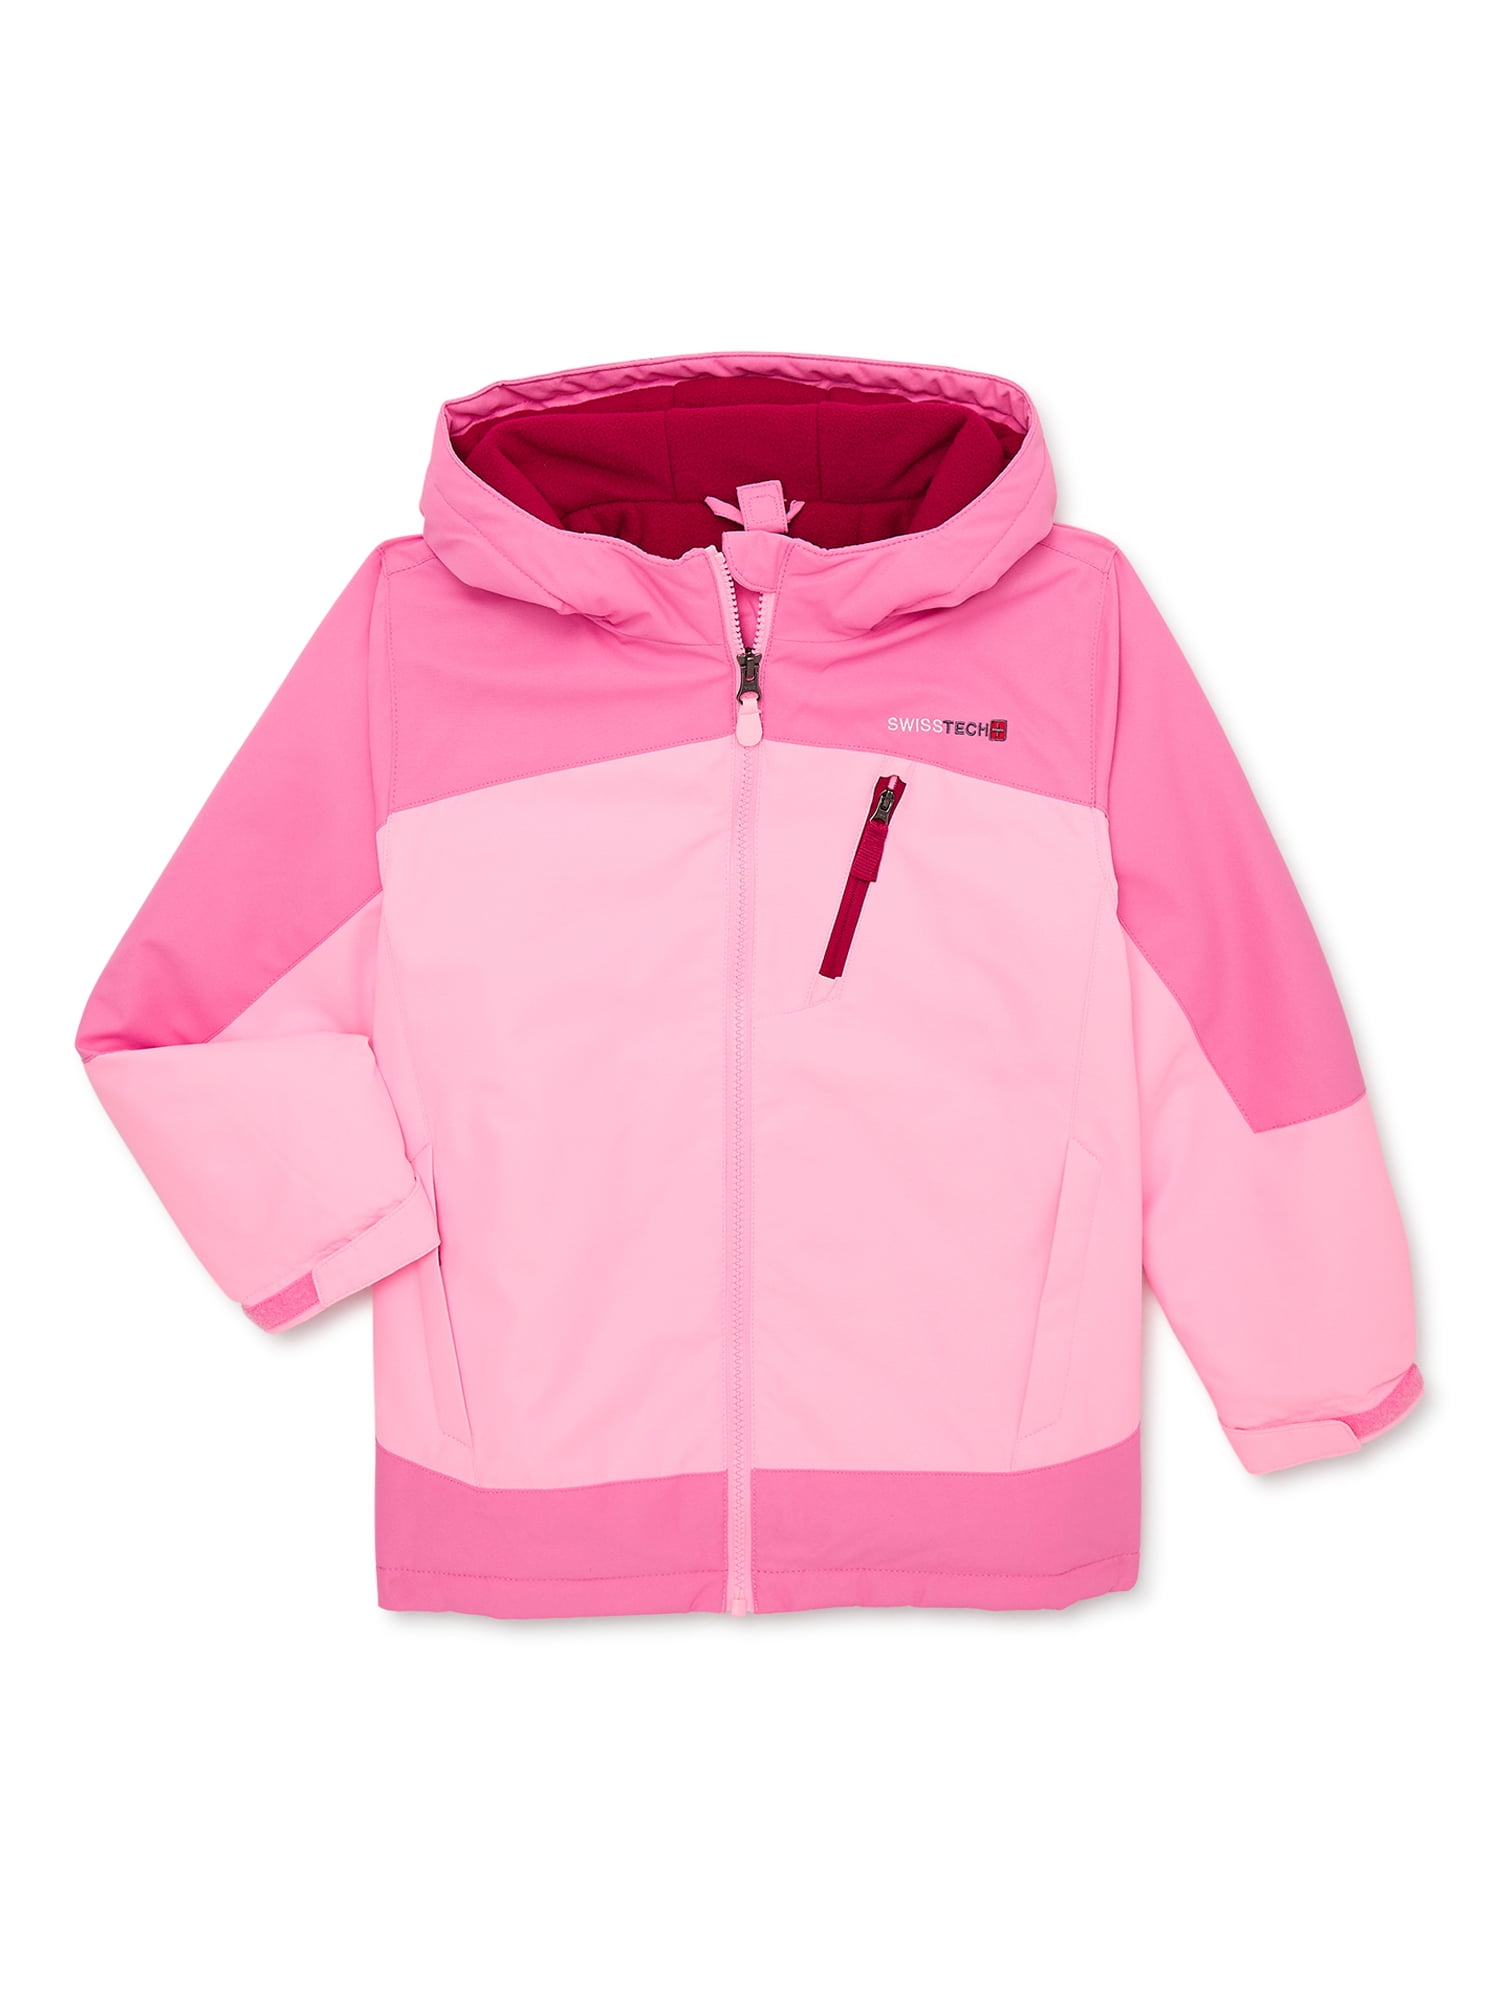 Buy Swiss Tech Girls 3-in-1 Systems Winter Jacket with Hood, Sizes 4-18 ...